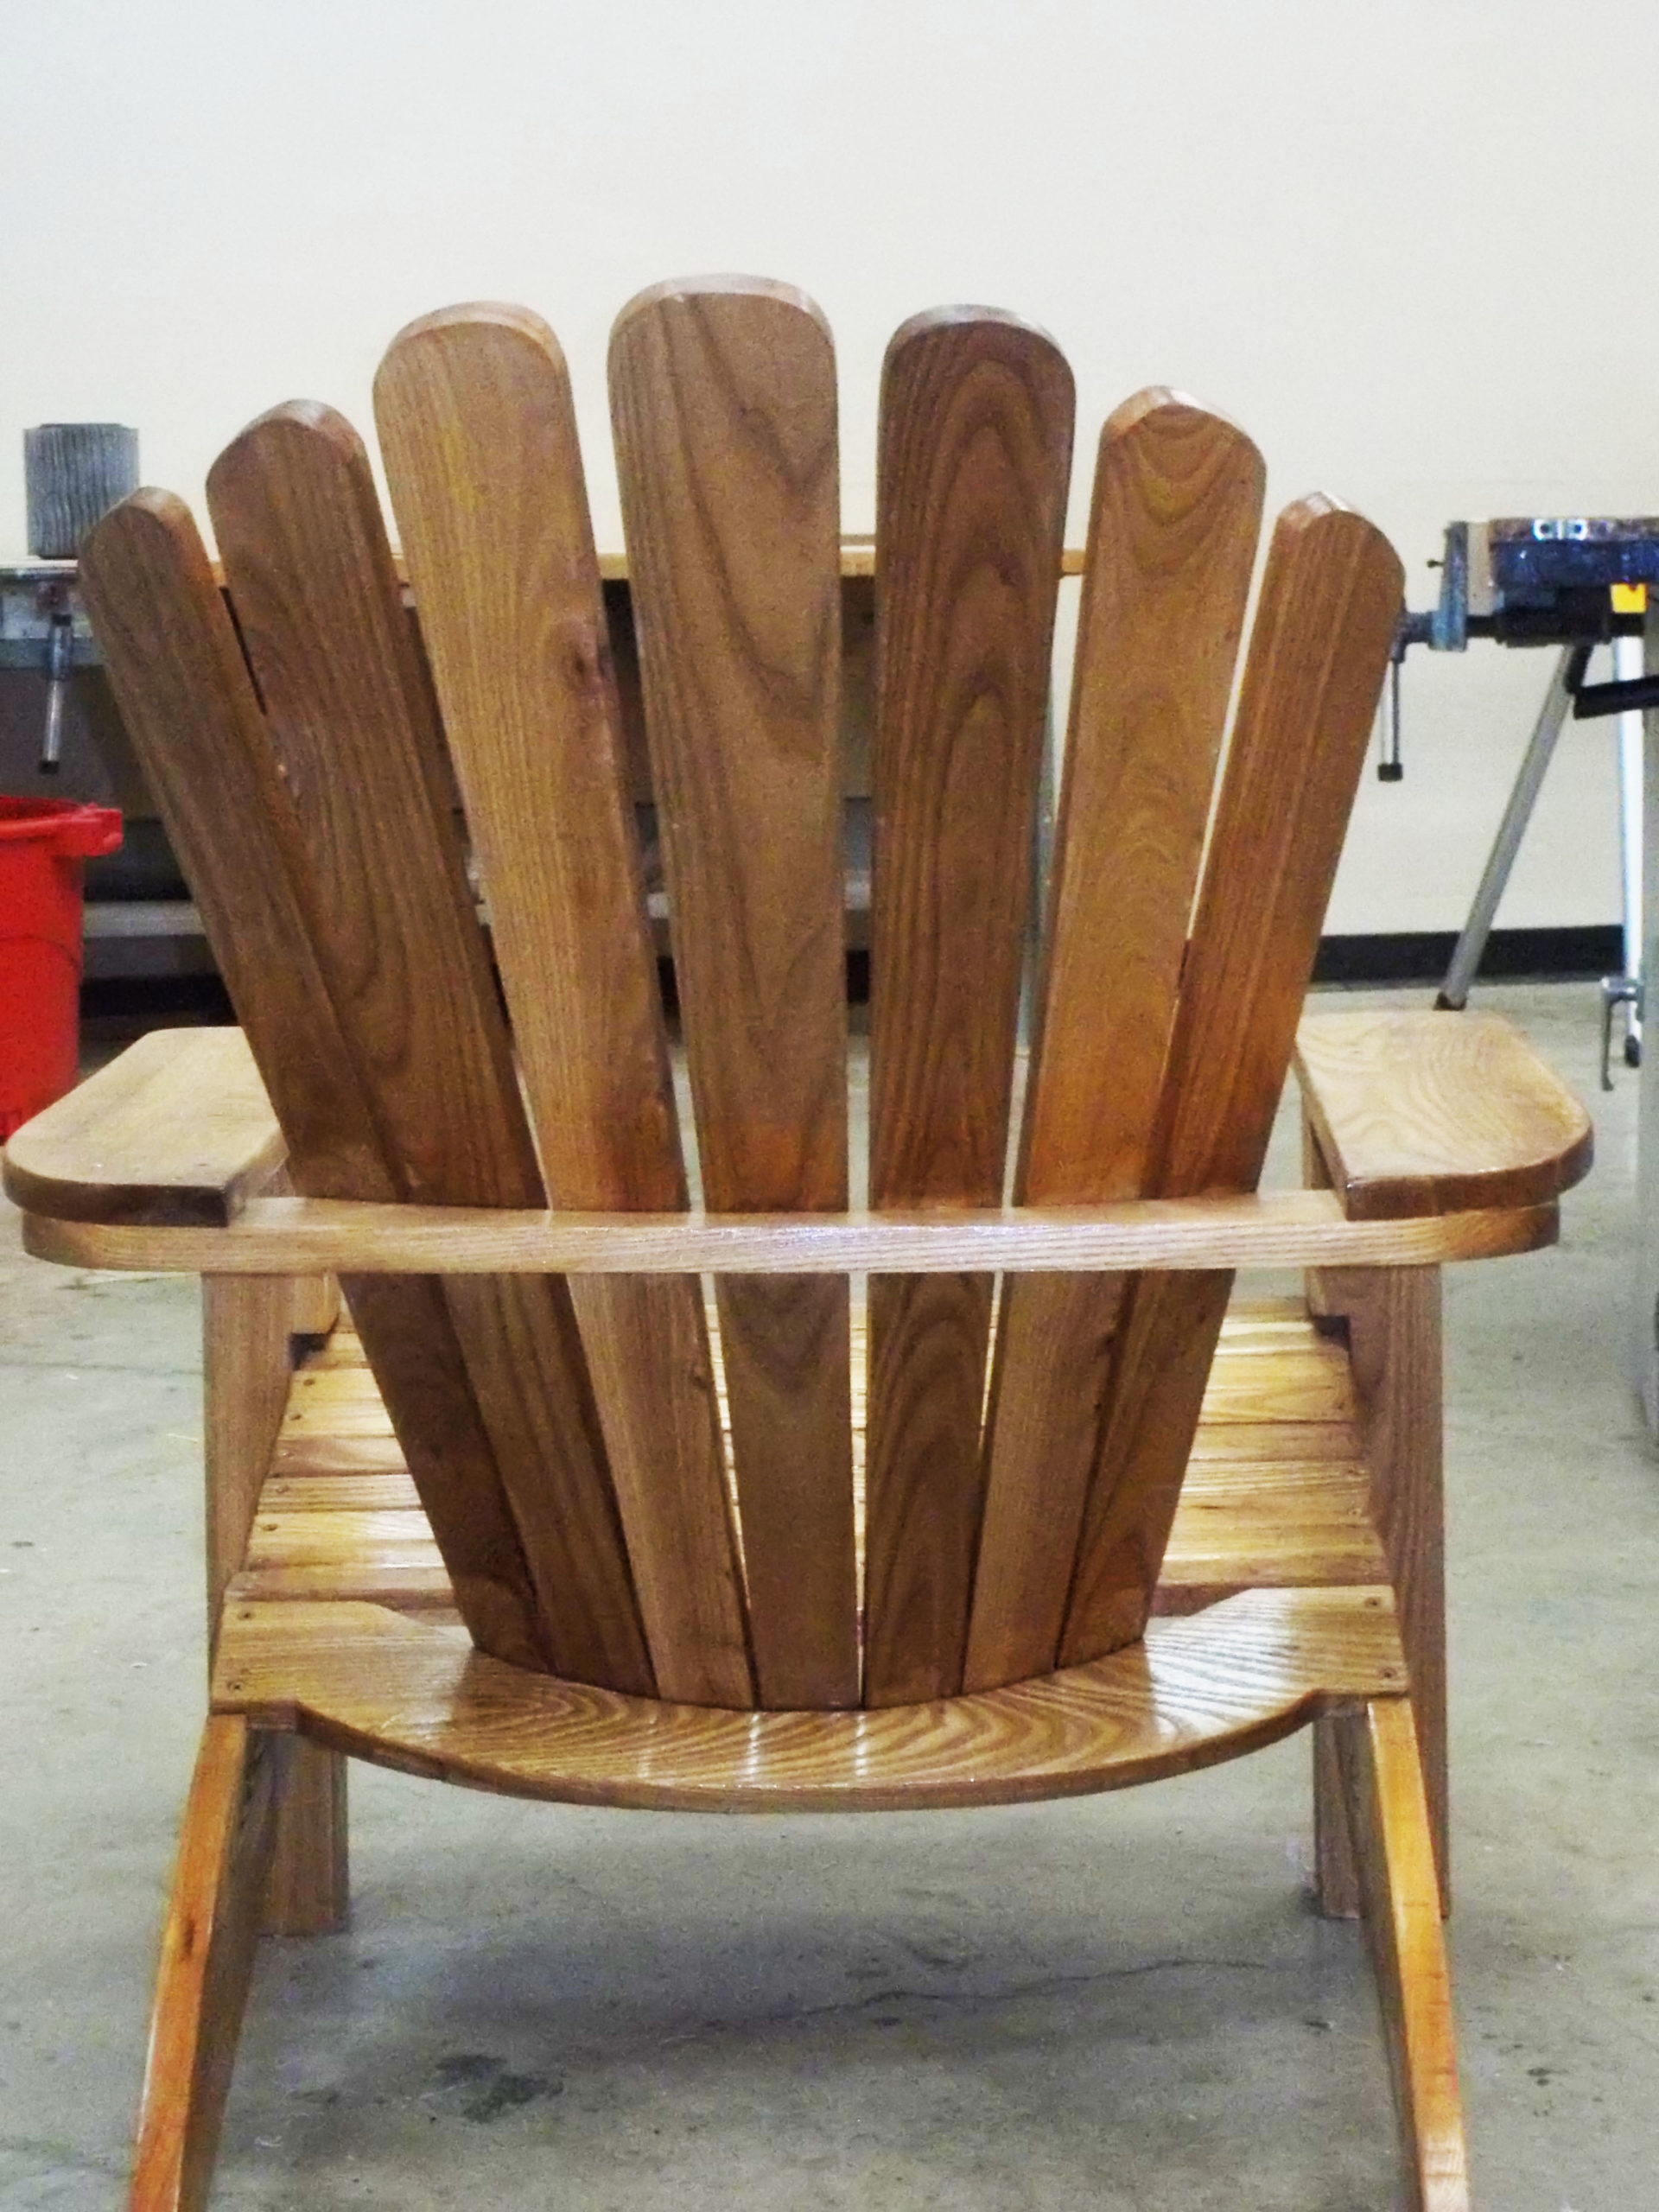 Adirondack Chairs for Grady's All-Stars - The Wood Whisperer